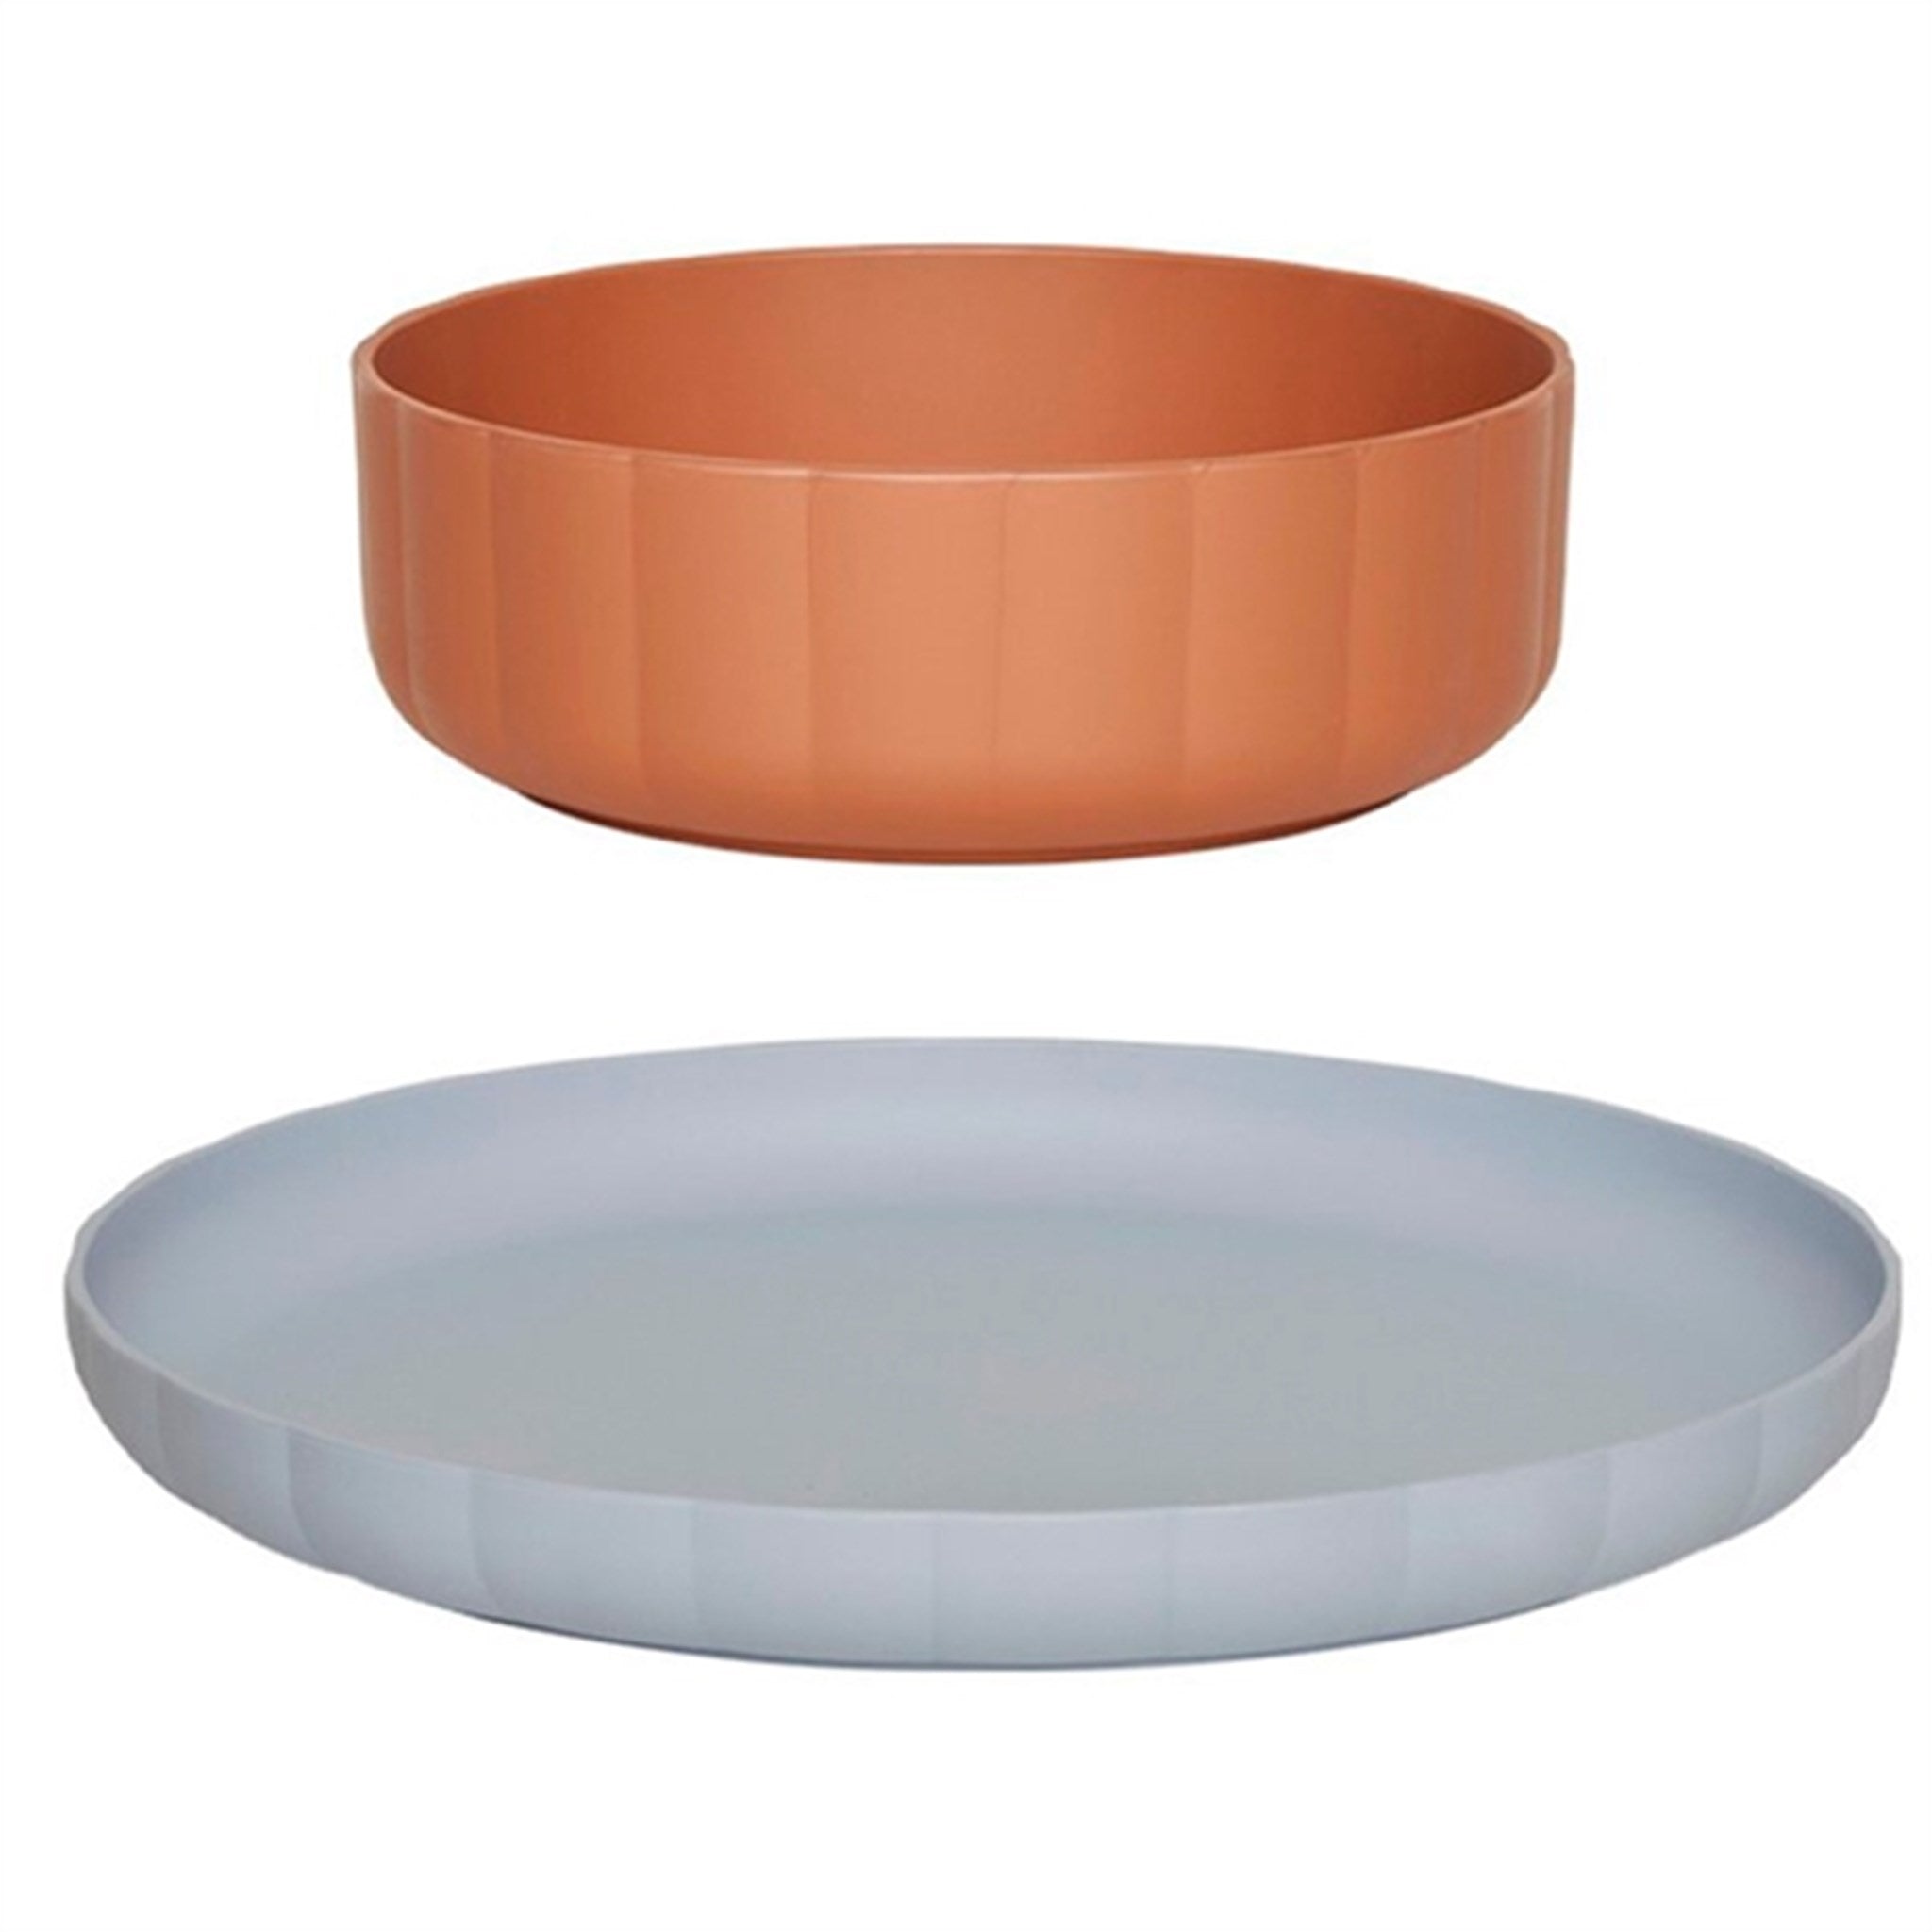 OYOY Pullo Plate and Bowl Caramel / Ice Blue